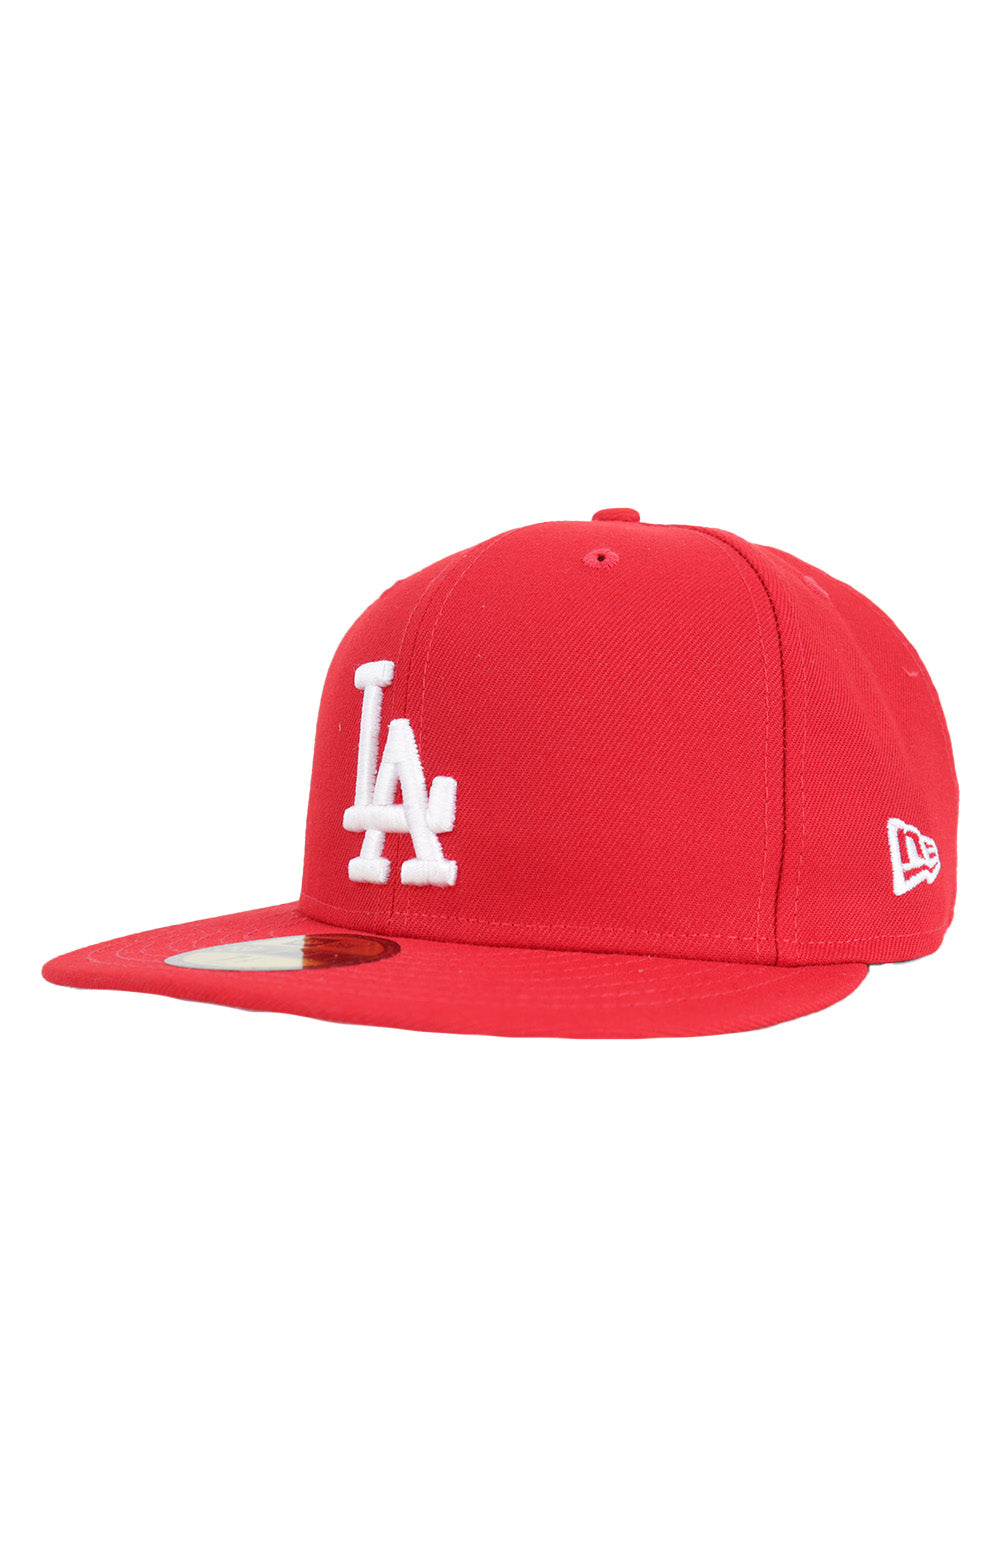 LA Dodgers 88 World Series Patch Up 59FIFTY Fitted Hat - Red/White